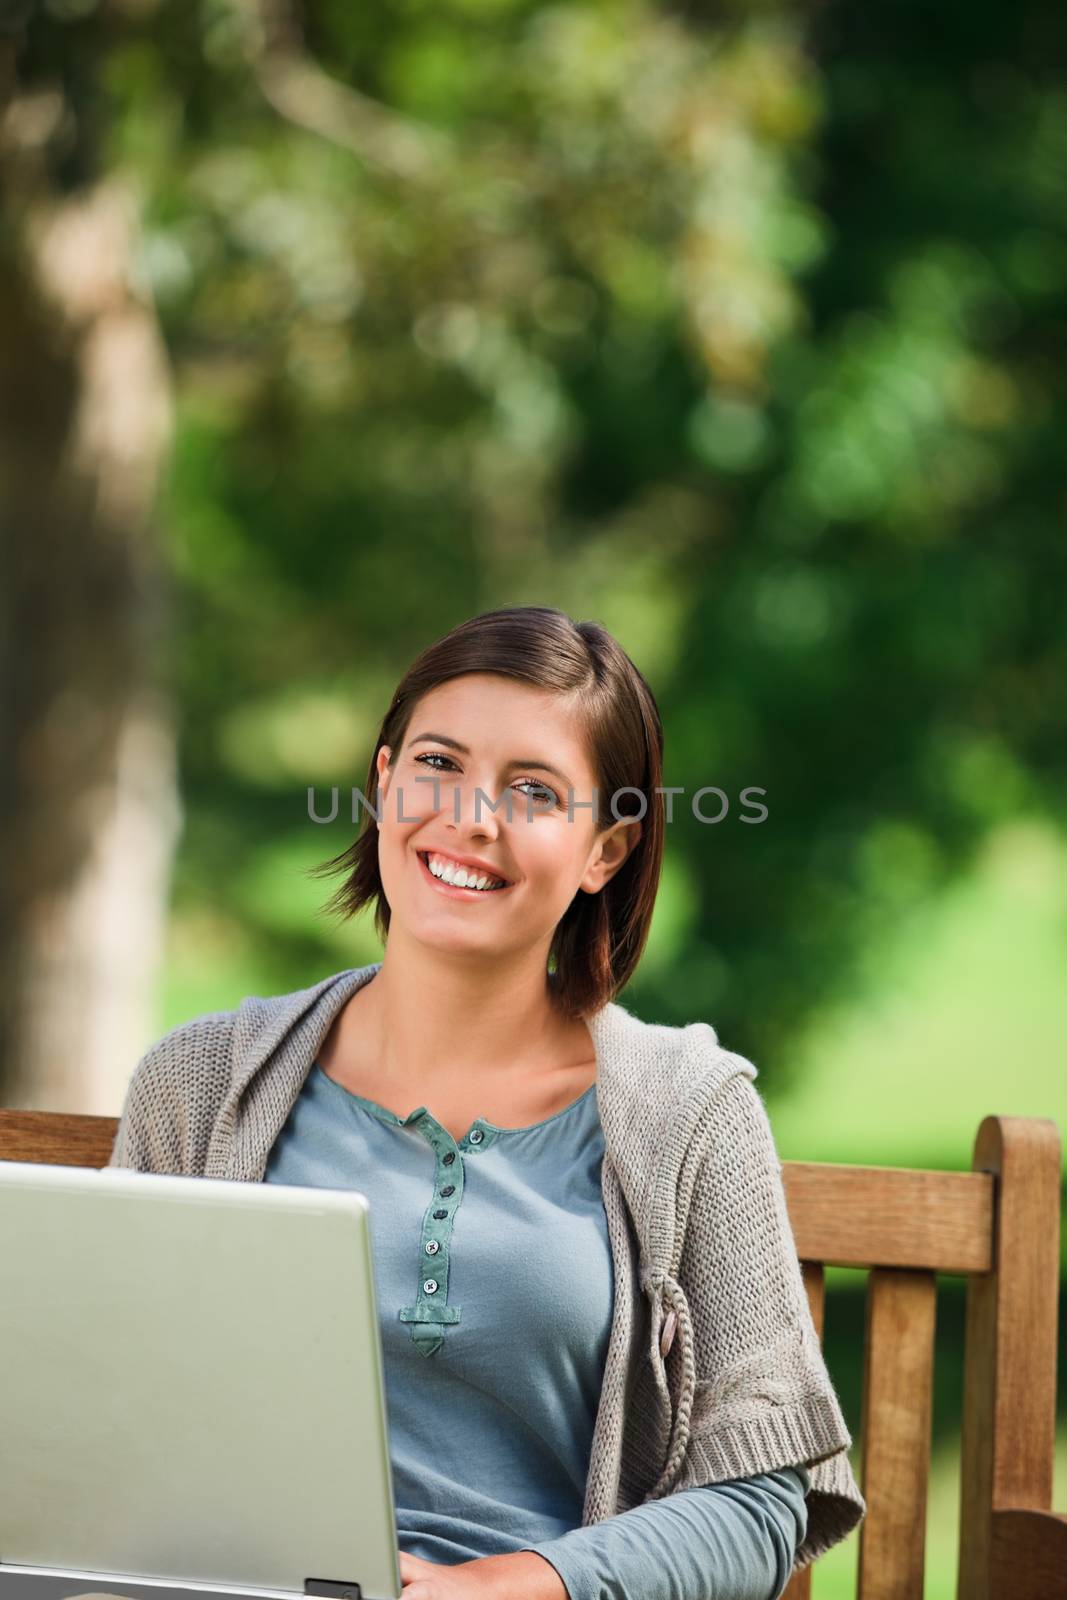 Woman working on her laptop in the park during the summer